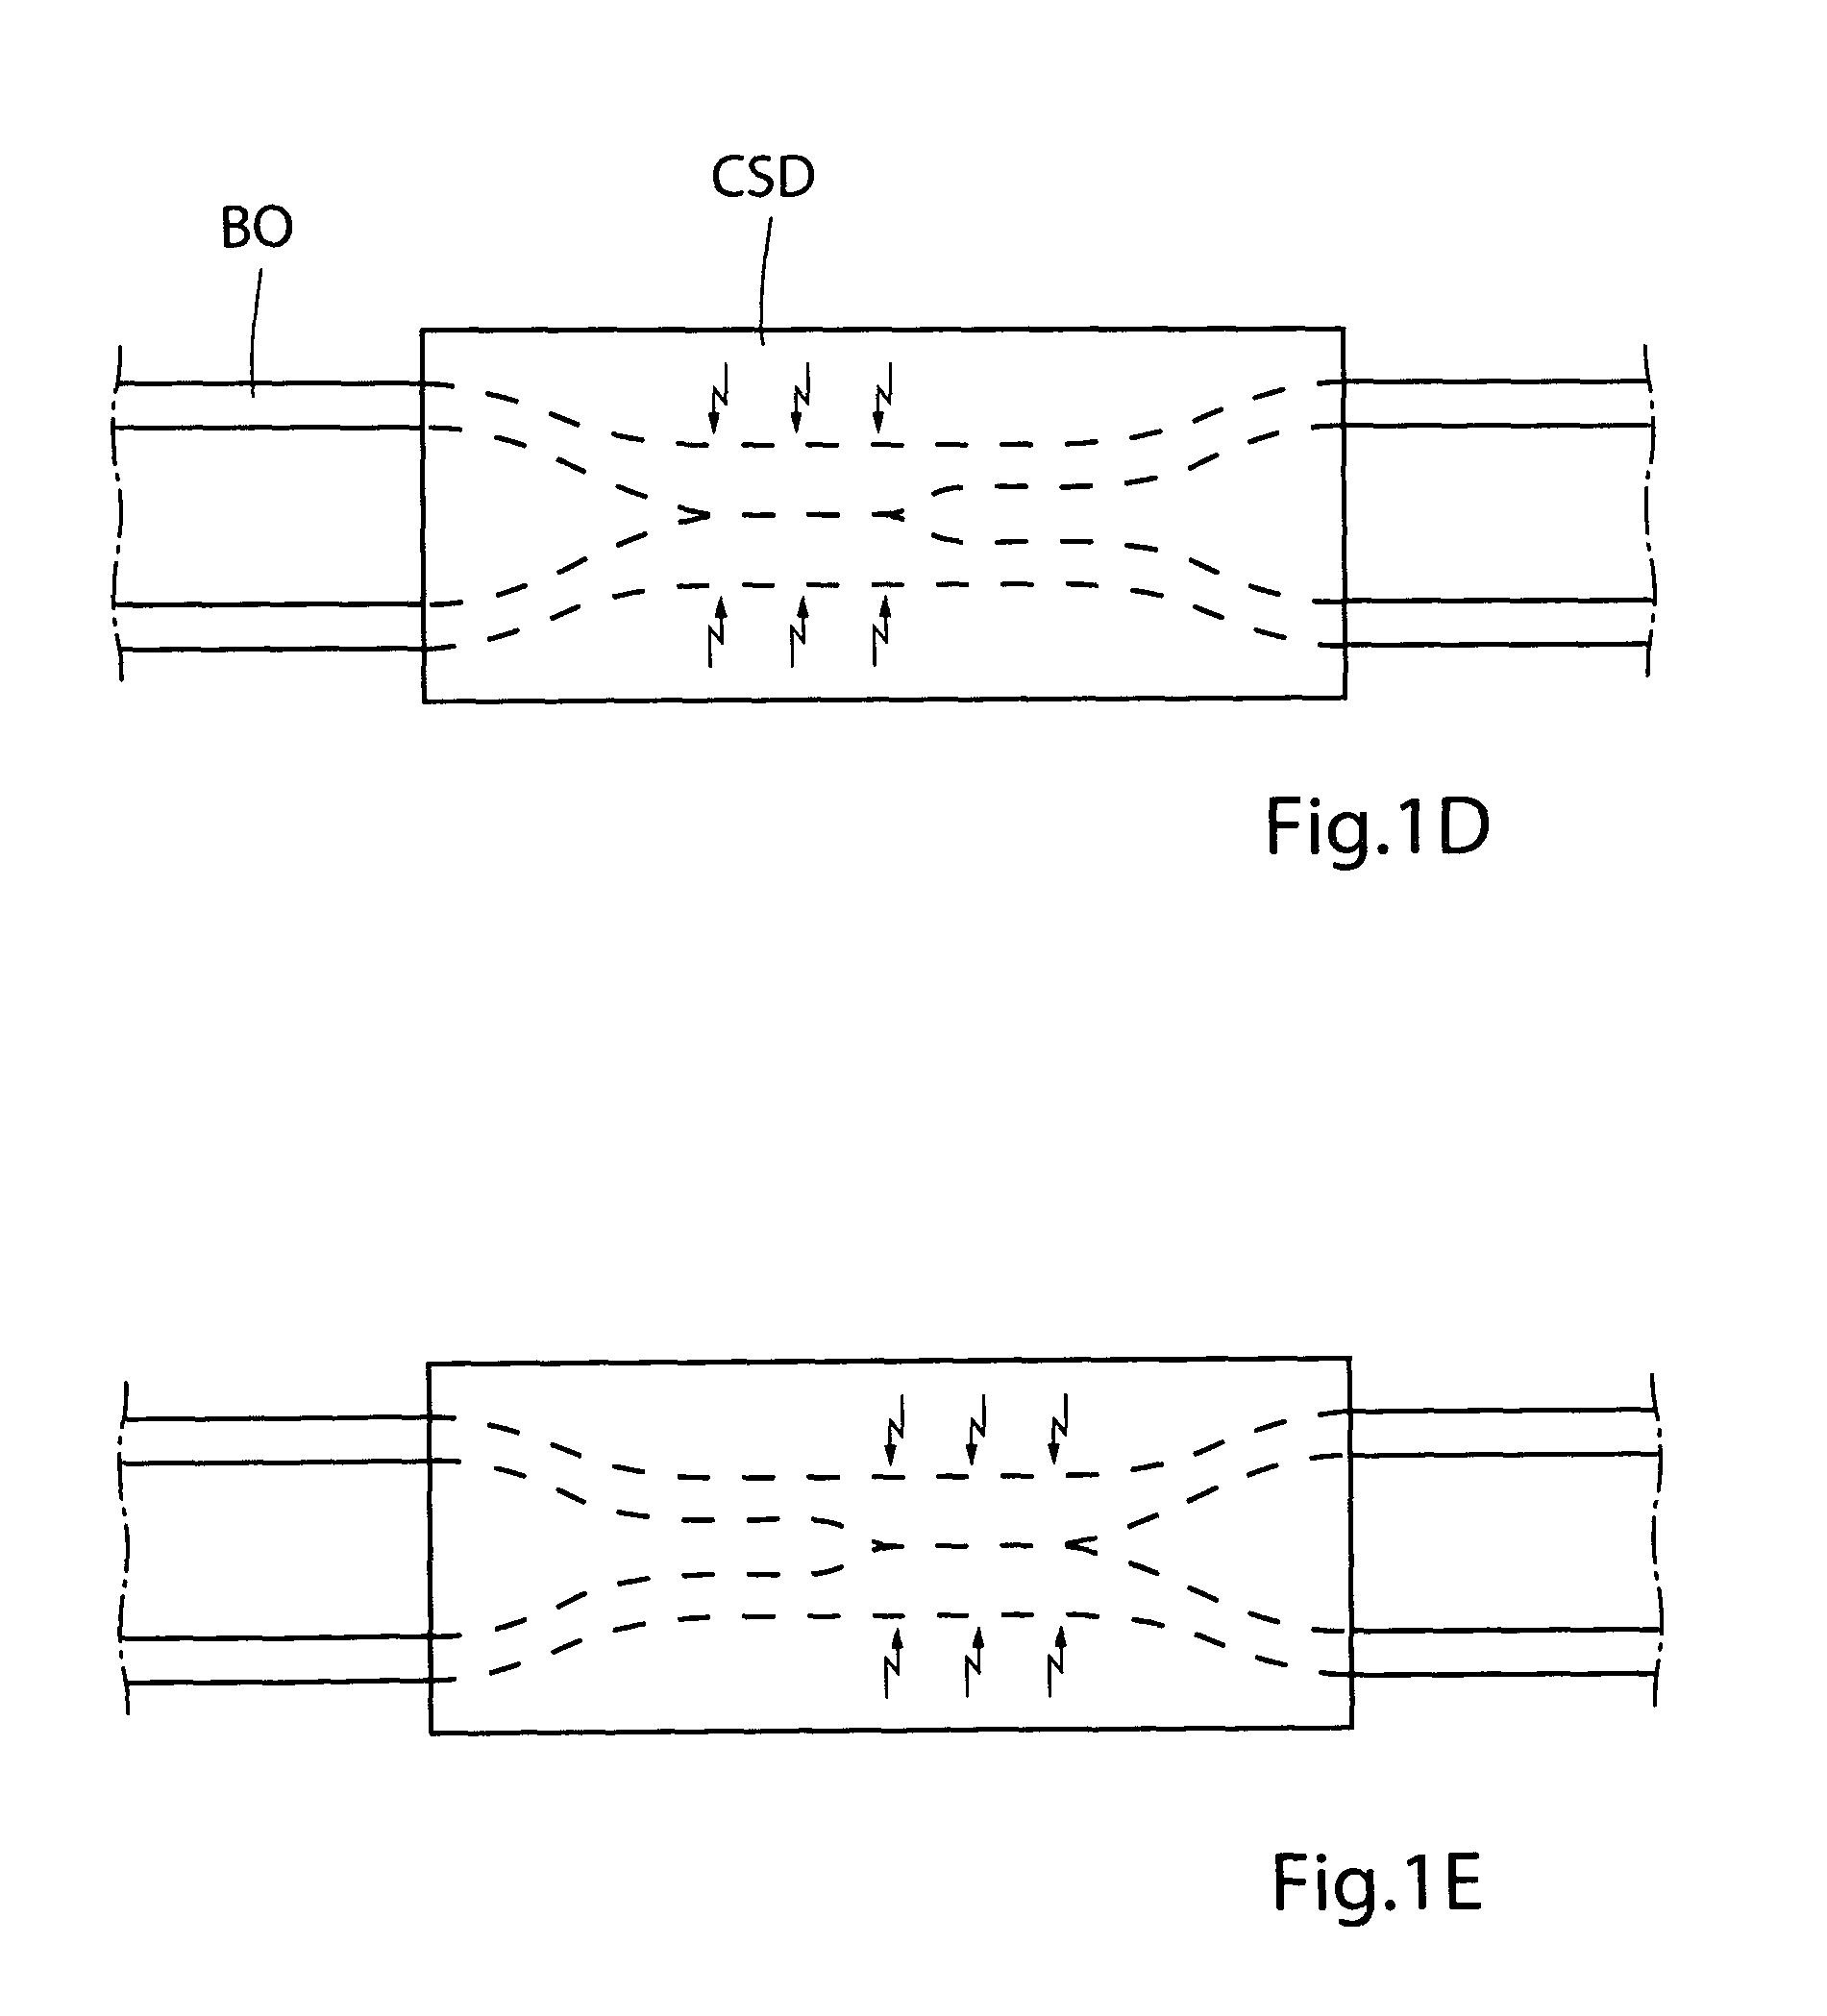 Method for controlling flow of intestinal contents in a patient's intestines